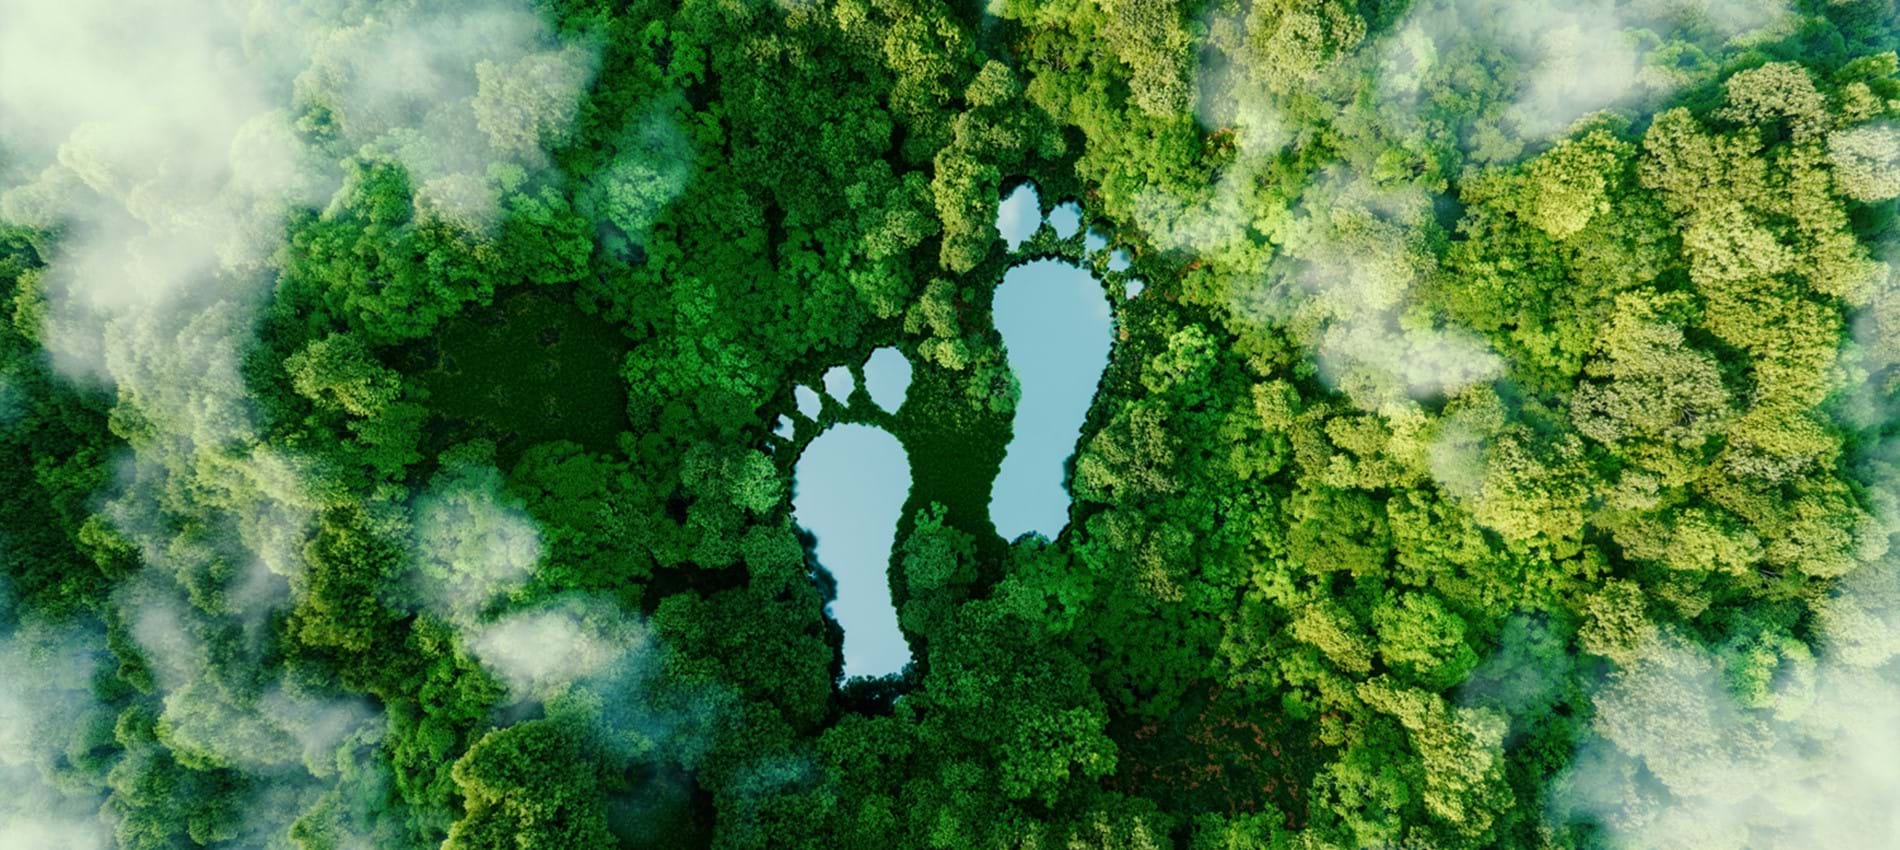 nojs An aerial view of a forest and clouds with two large lake-like footprints to represent carbon footprint.